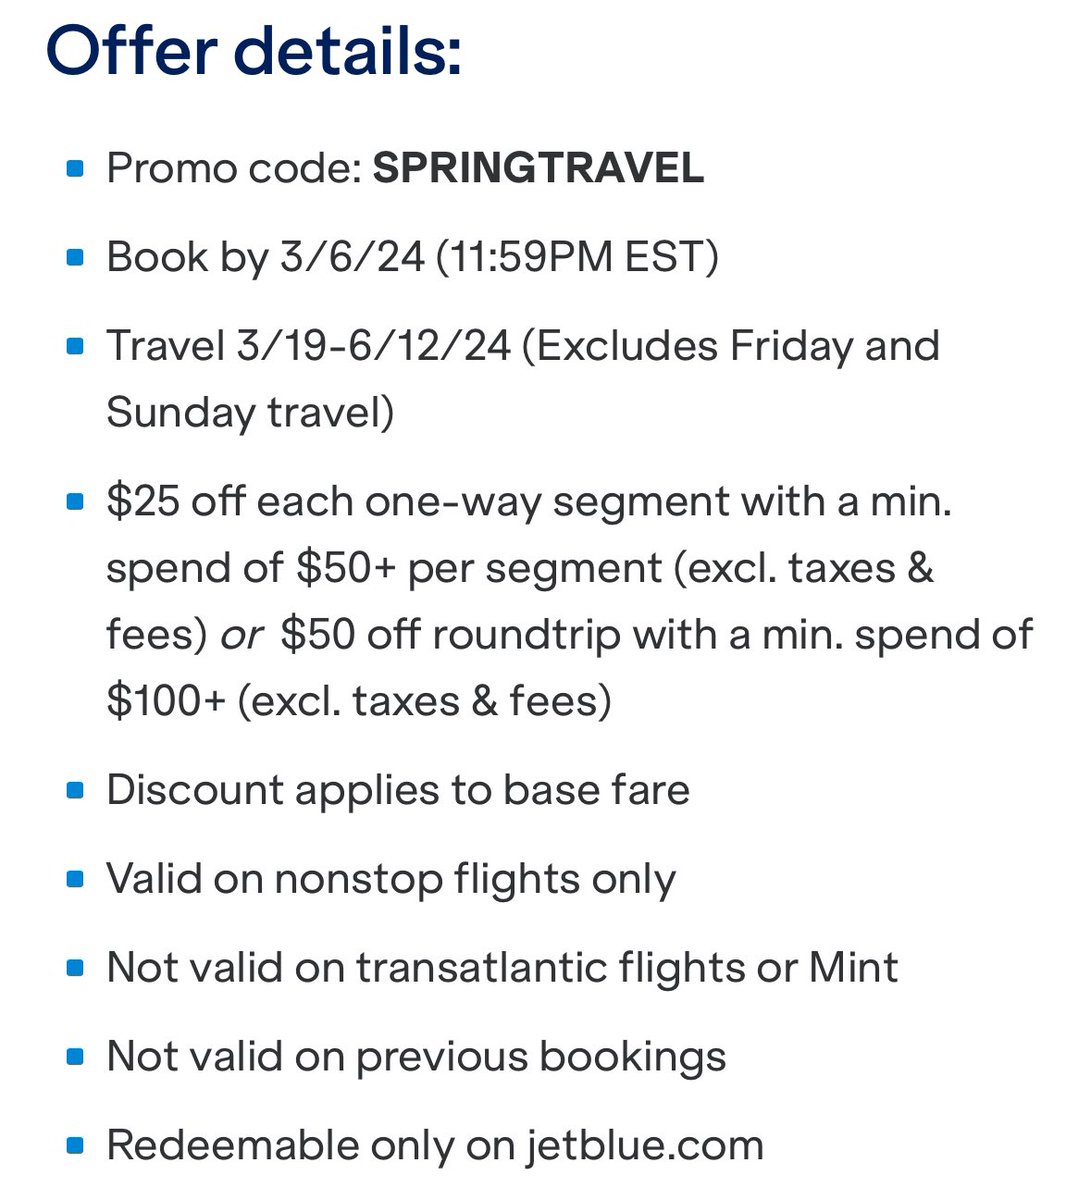 🎉JetBlue has a new sale!🎉

Use code SPRINGTRAVEL to get $50 off a $100+ roundtrip flight (or $25 off a $50+ one way flight). Must book by 11:59 PM EST on 03/06/24.

More details here ⬇️